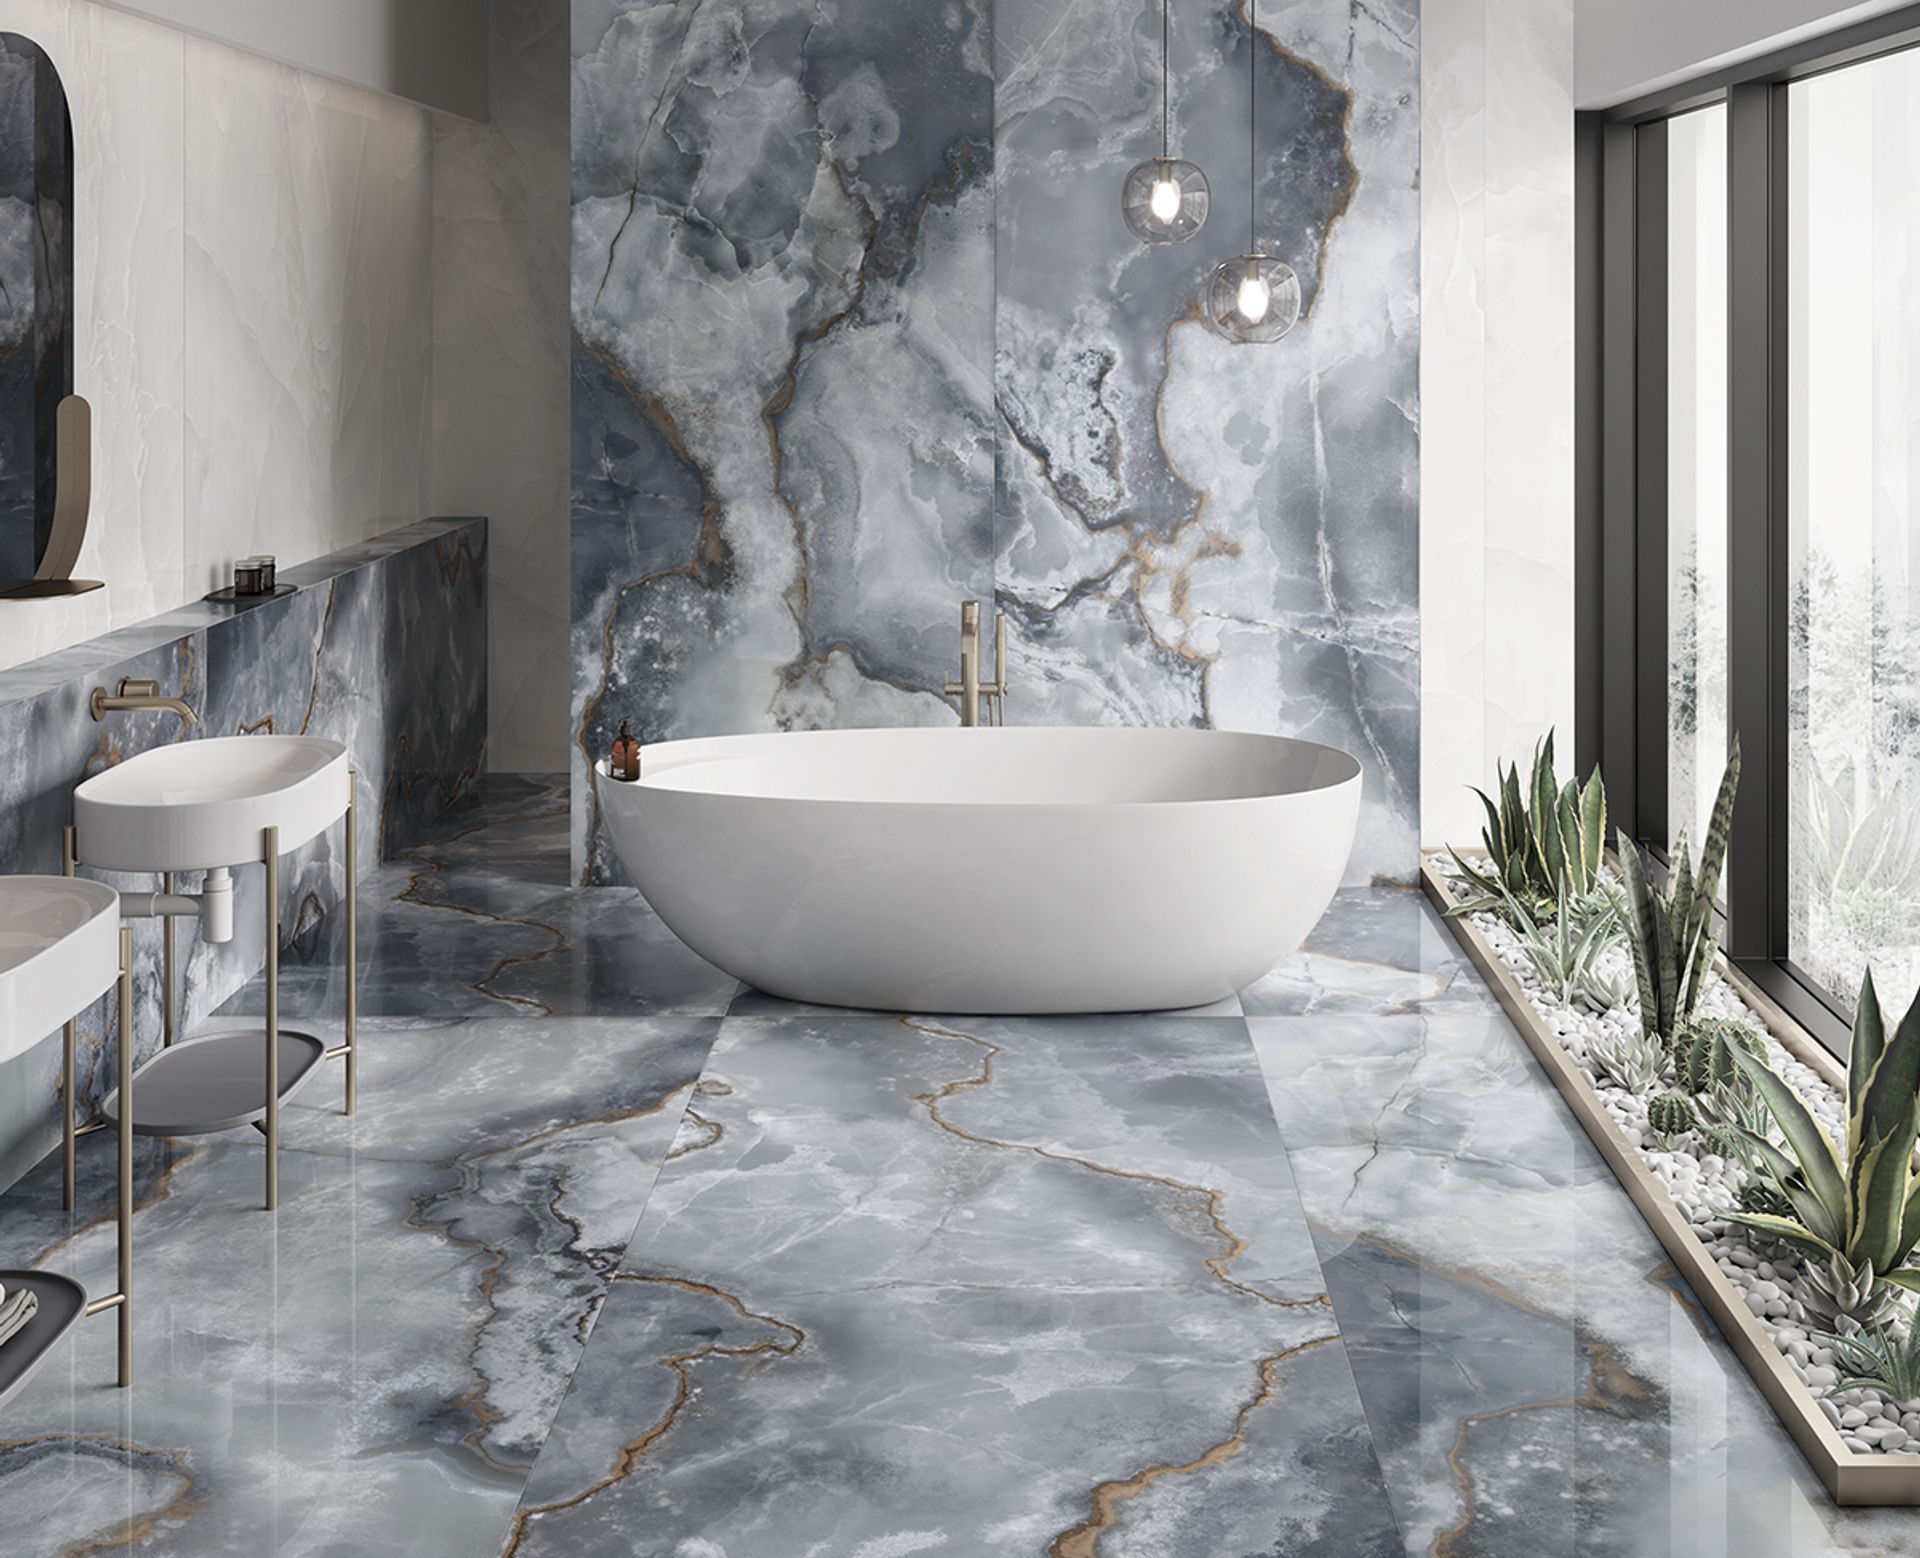 Trend report: 5 tile styles for your kitchen, bathroom and beyond